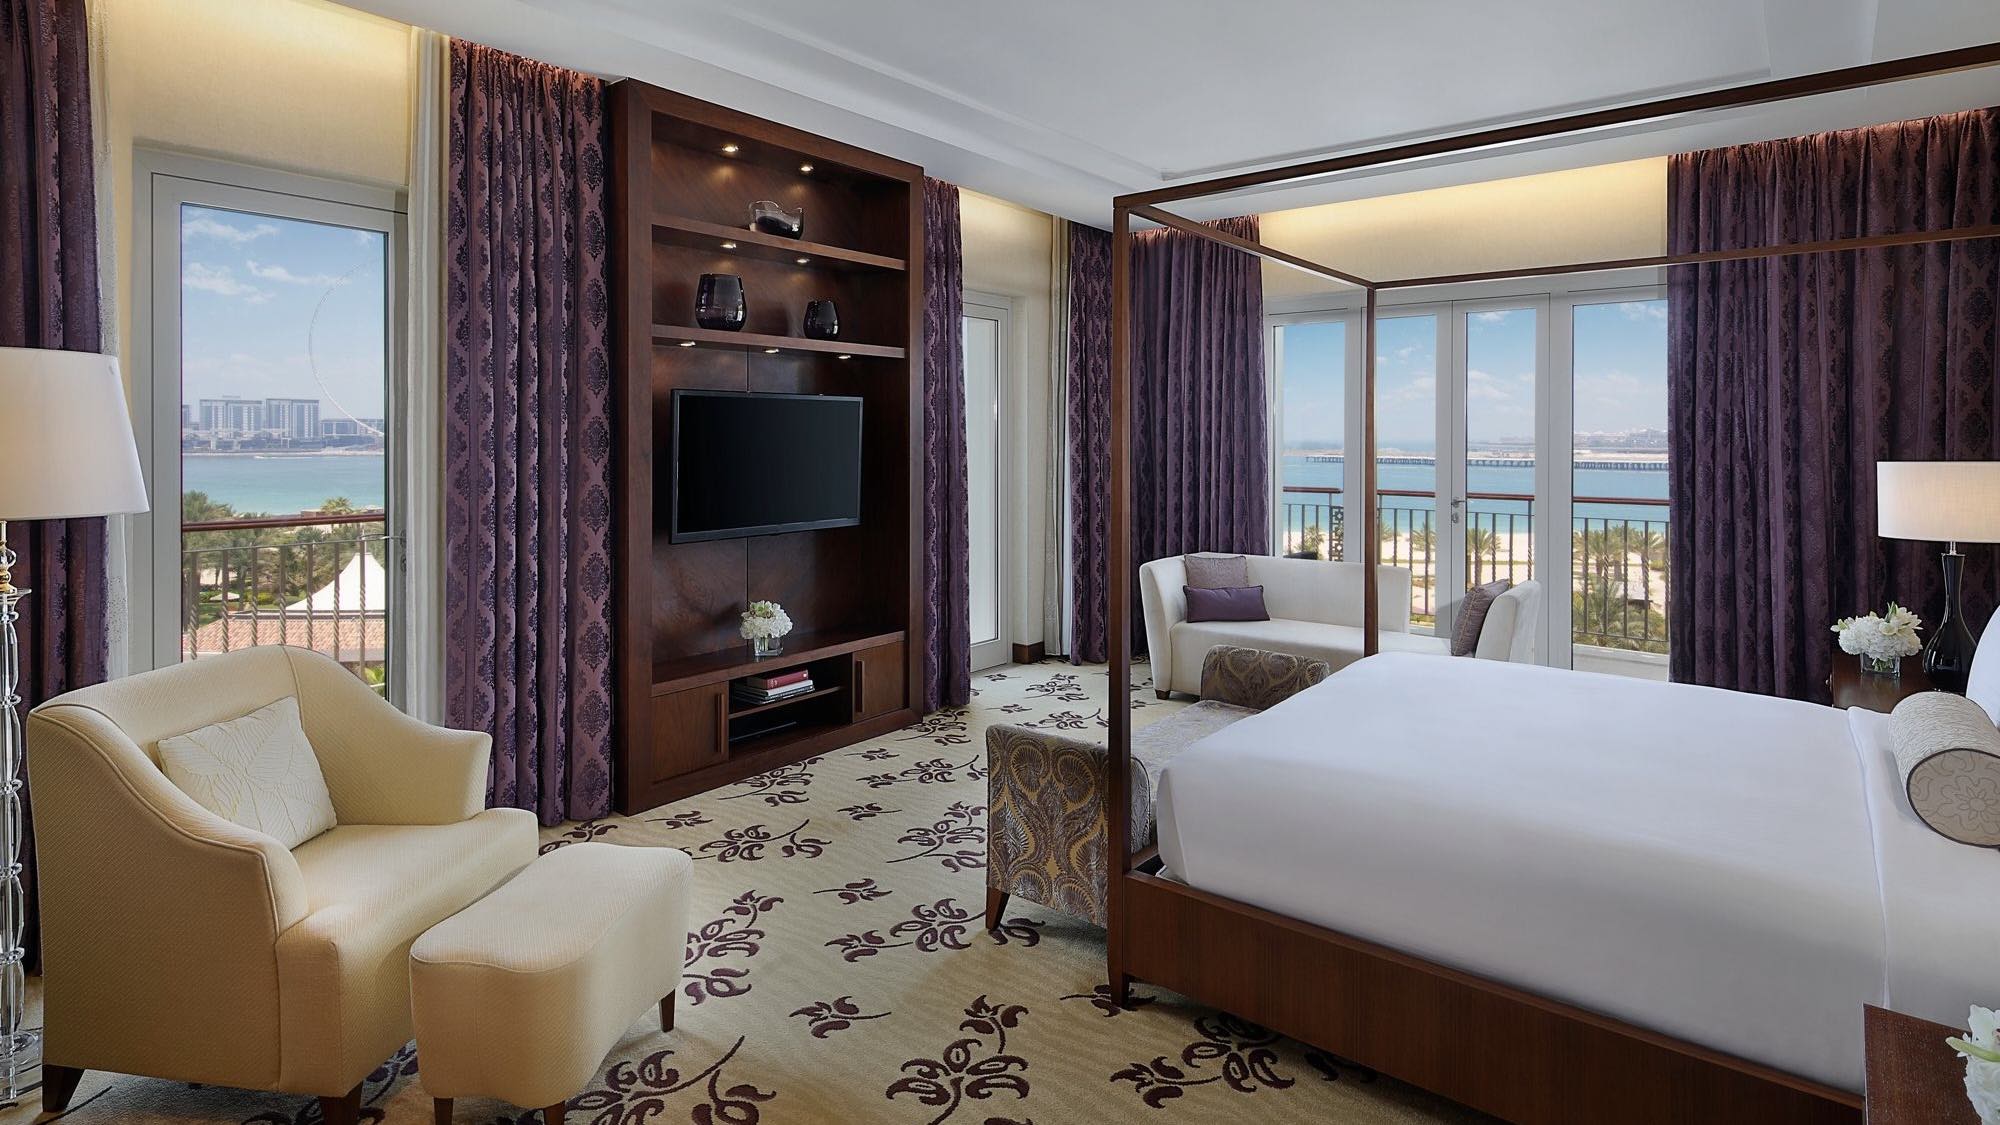 The Ritz-Carlton, Dubai bedroom with view one of the best 5-star hotels in Dubai